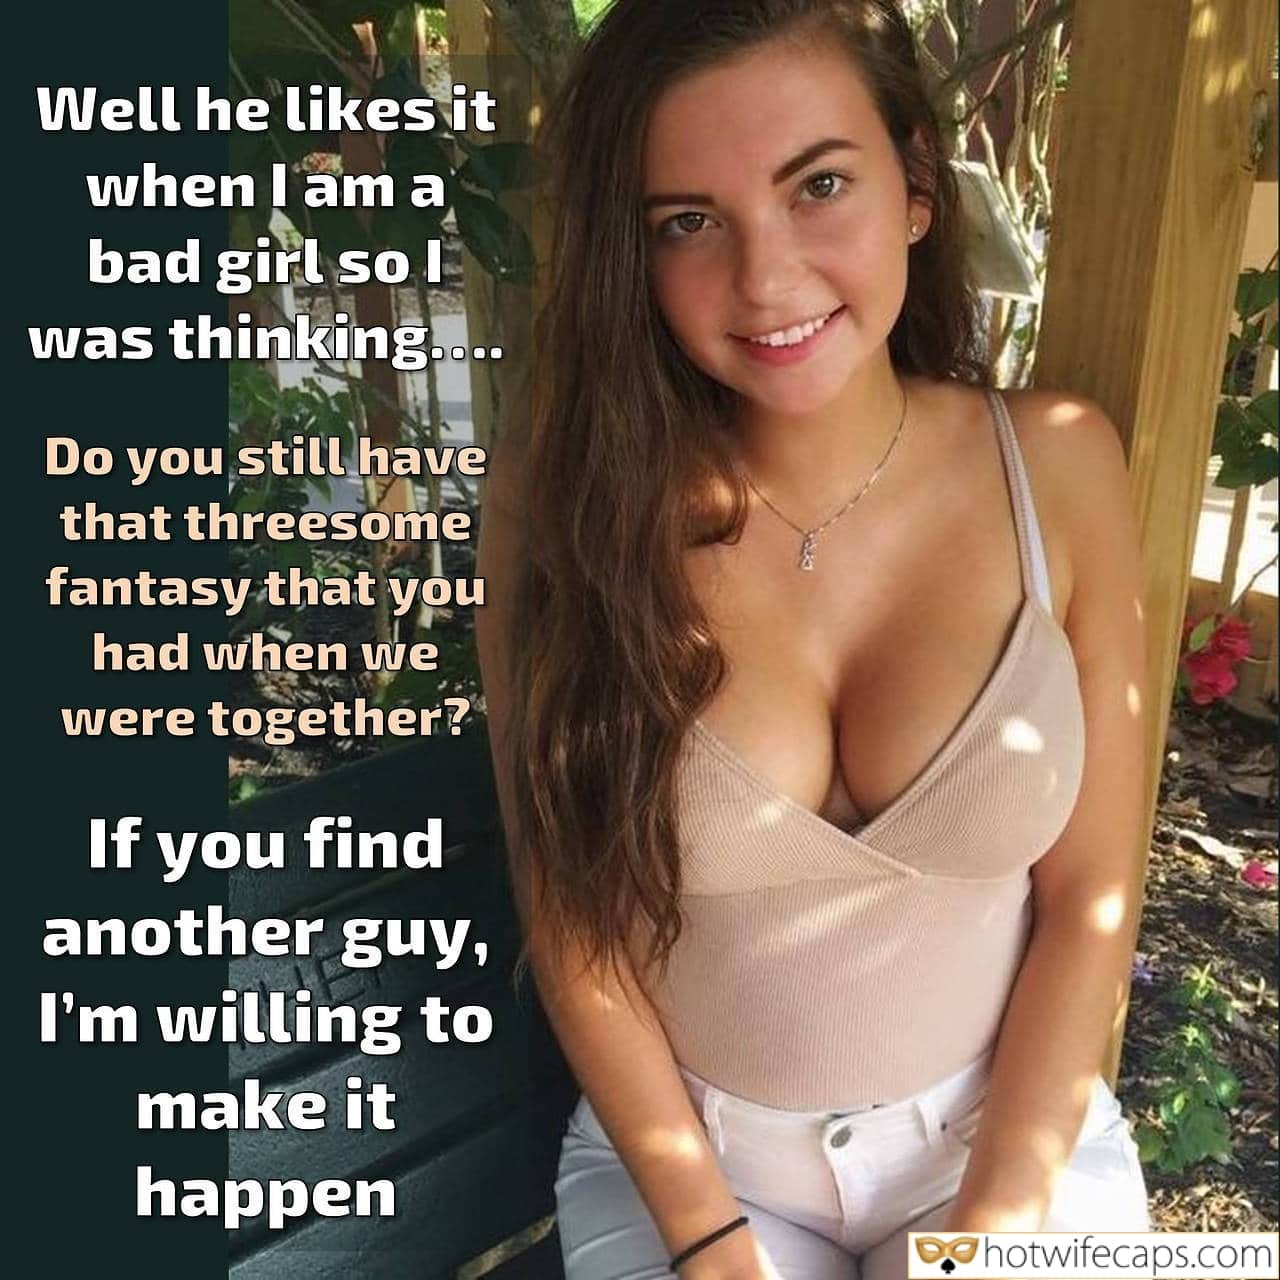 Wife Sharing Sexy Memes Flashing Cuckold Cleanup Cheating hotwife caption: Well he likes it when I am a bad girl so I was thinking…. Do you still have that threesome fantasy that you had when we were together? If you find another guy, I’m willing to make it happen Cute...